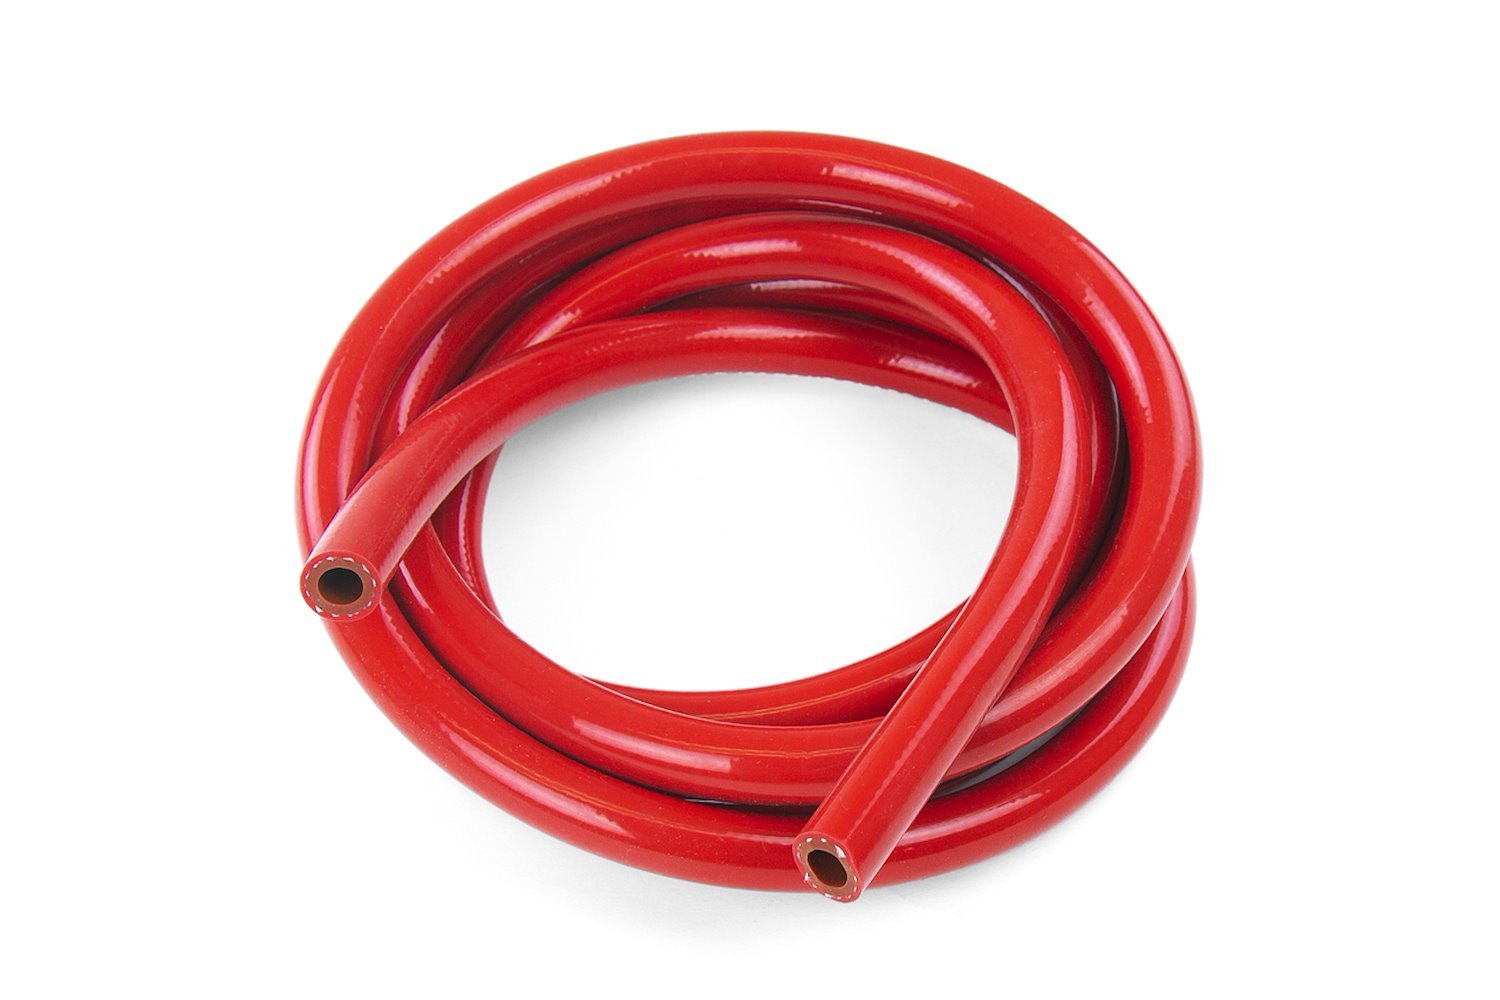 HTHH-100-REDx10 Silicone Heater Hose Tubing, High-Temp 1-Ply Reinforced, 1 in. ID, 10 ft. Roll, Red